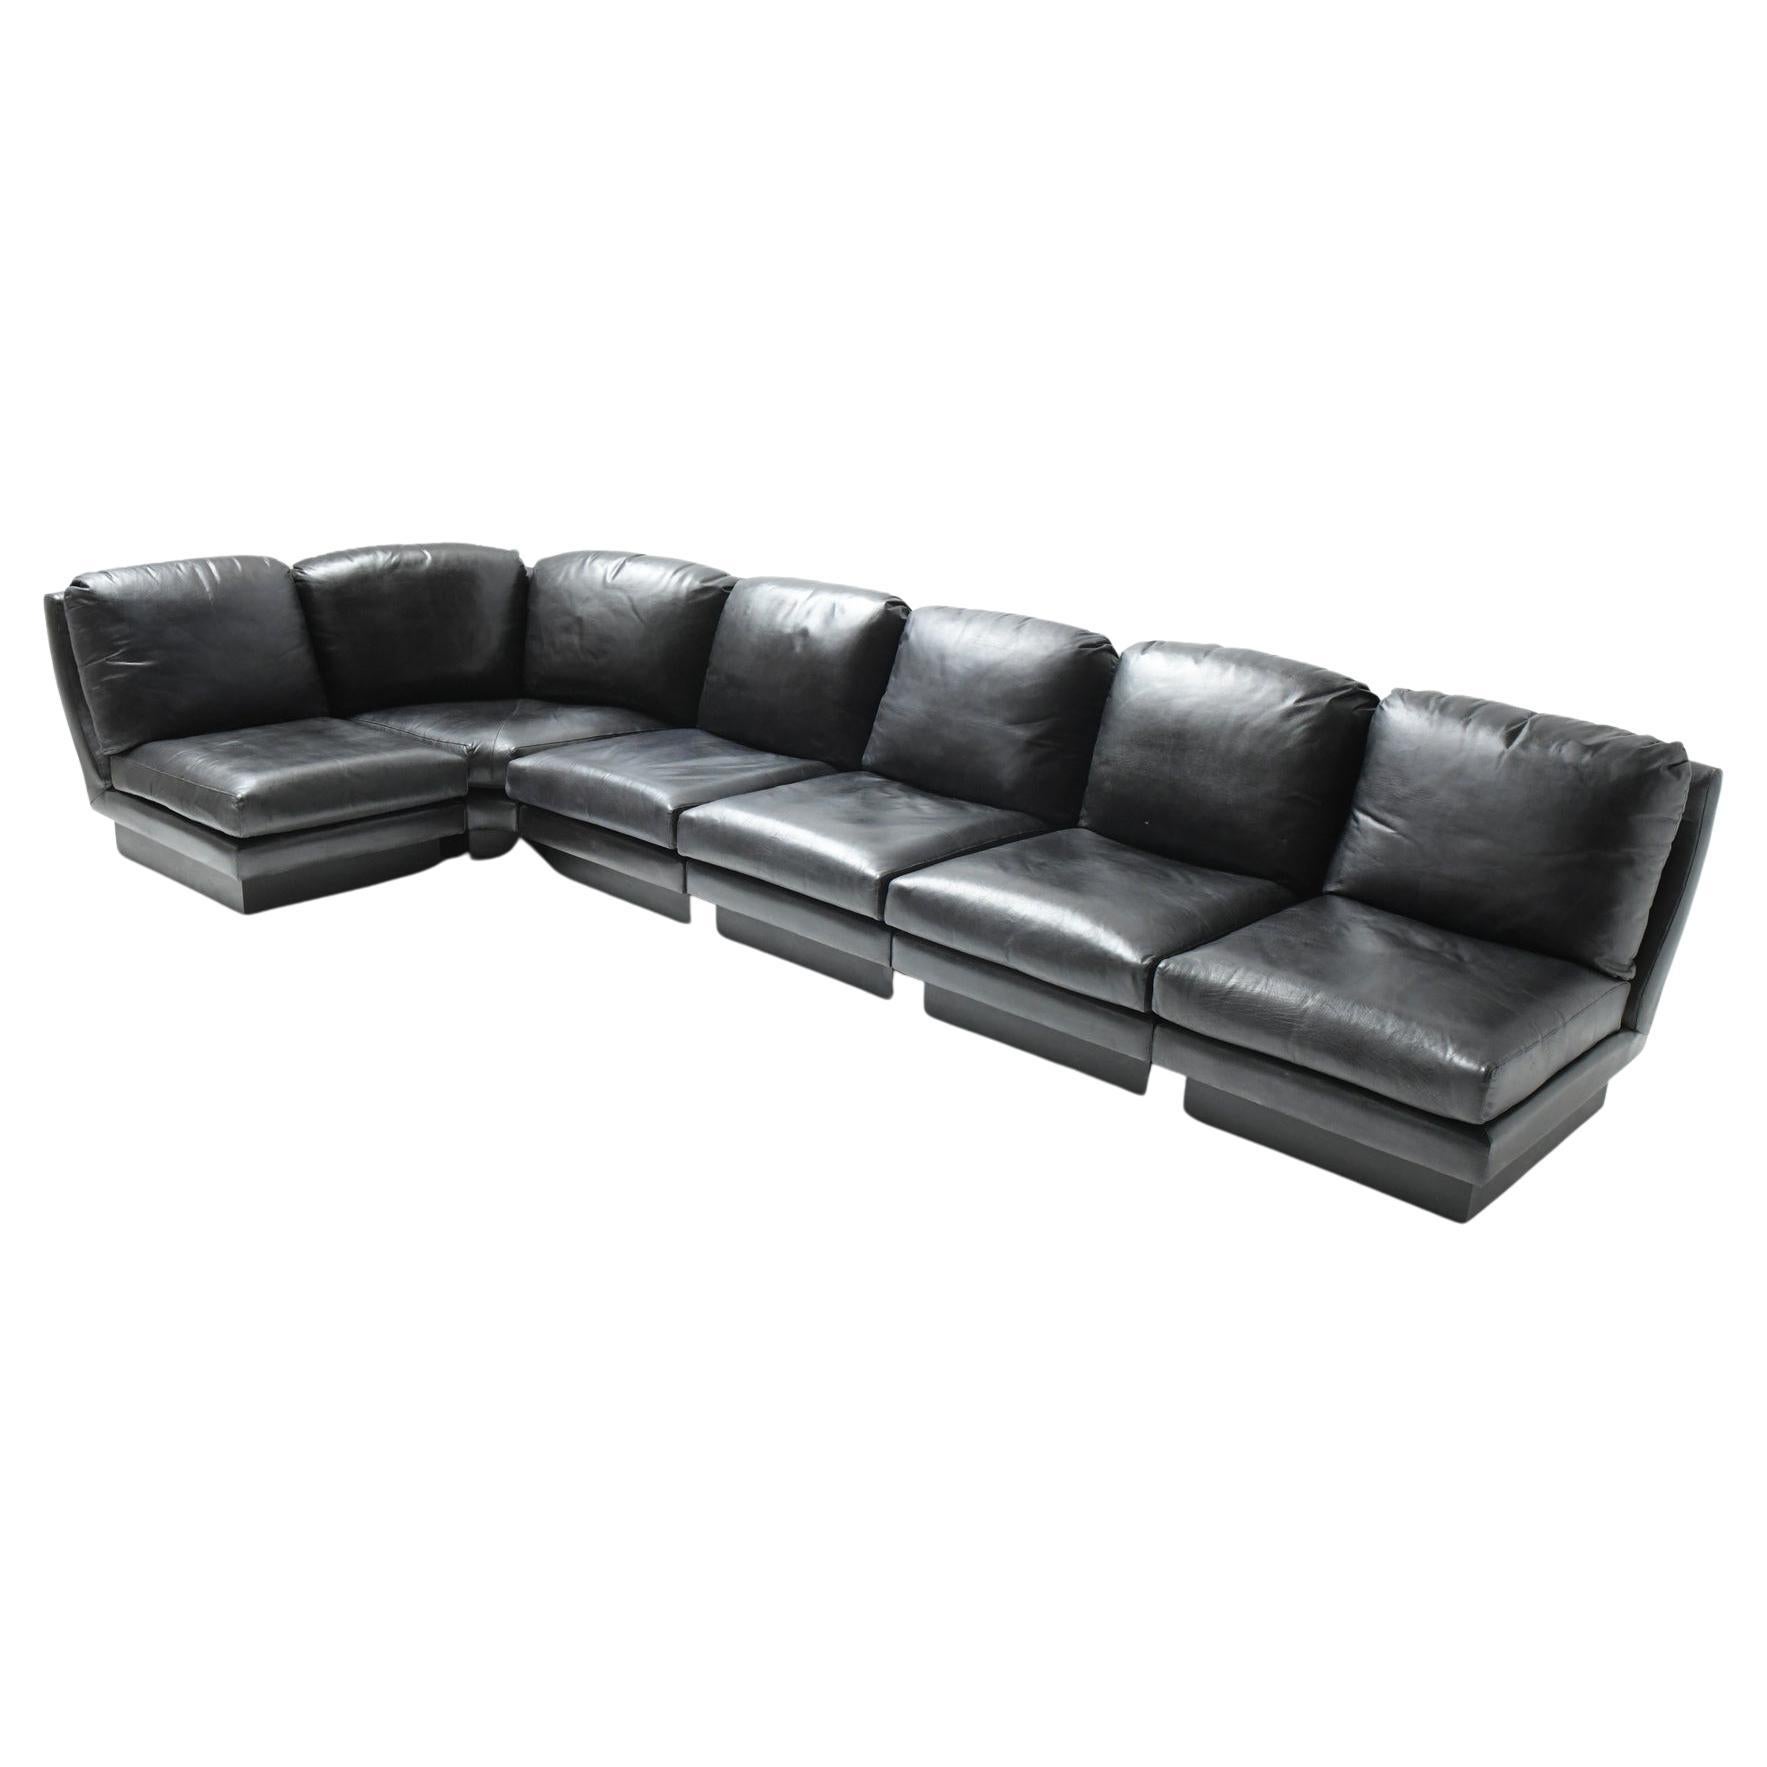 Rare Vintage Super C Modular Black Leather Sofa  by Willy Rizzo Italy